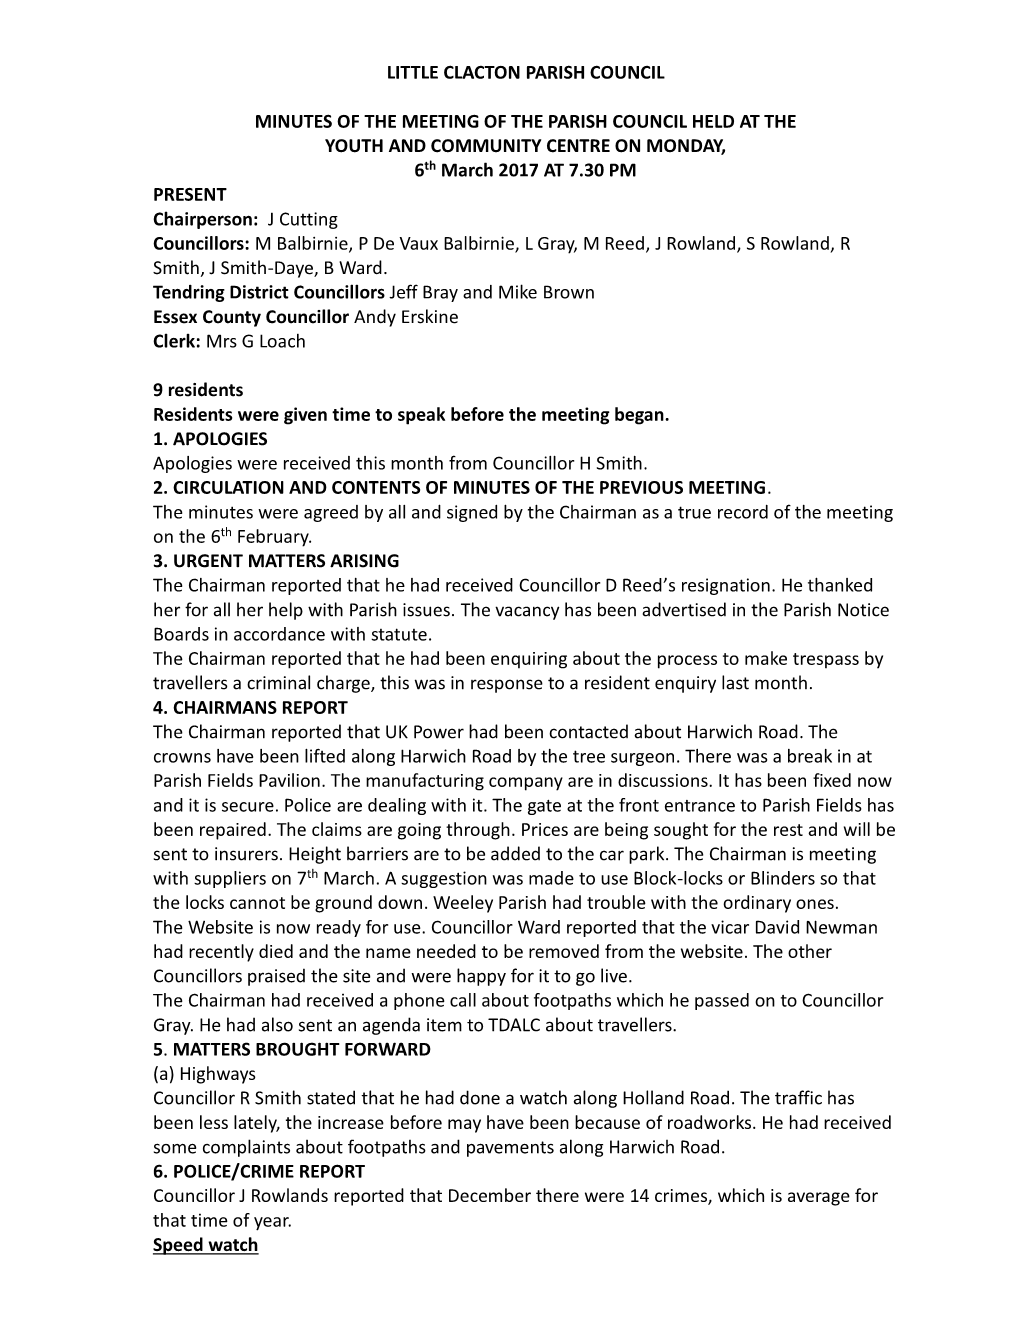 Little Clacton Parish Council Minutes of the Meeting Of